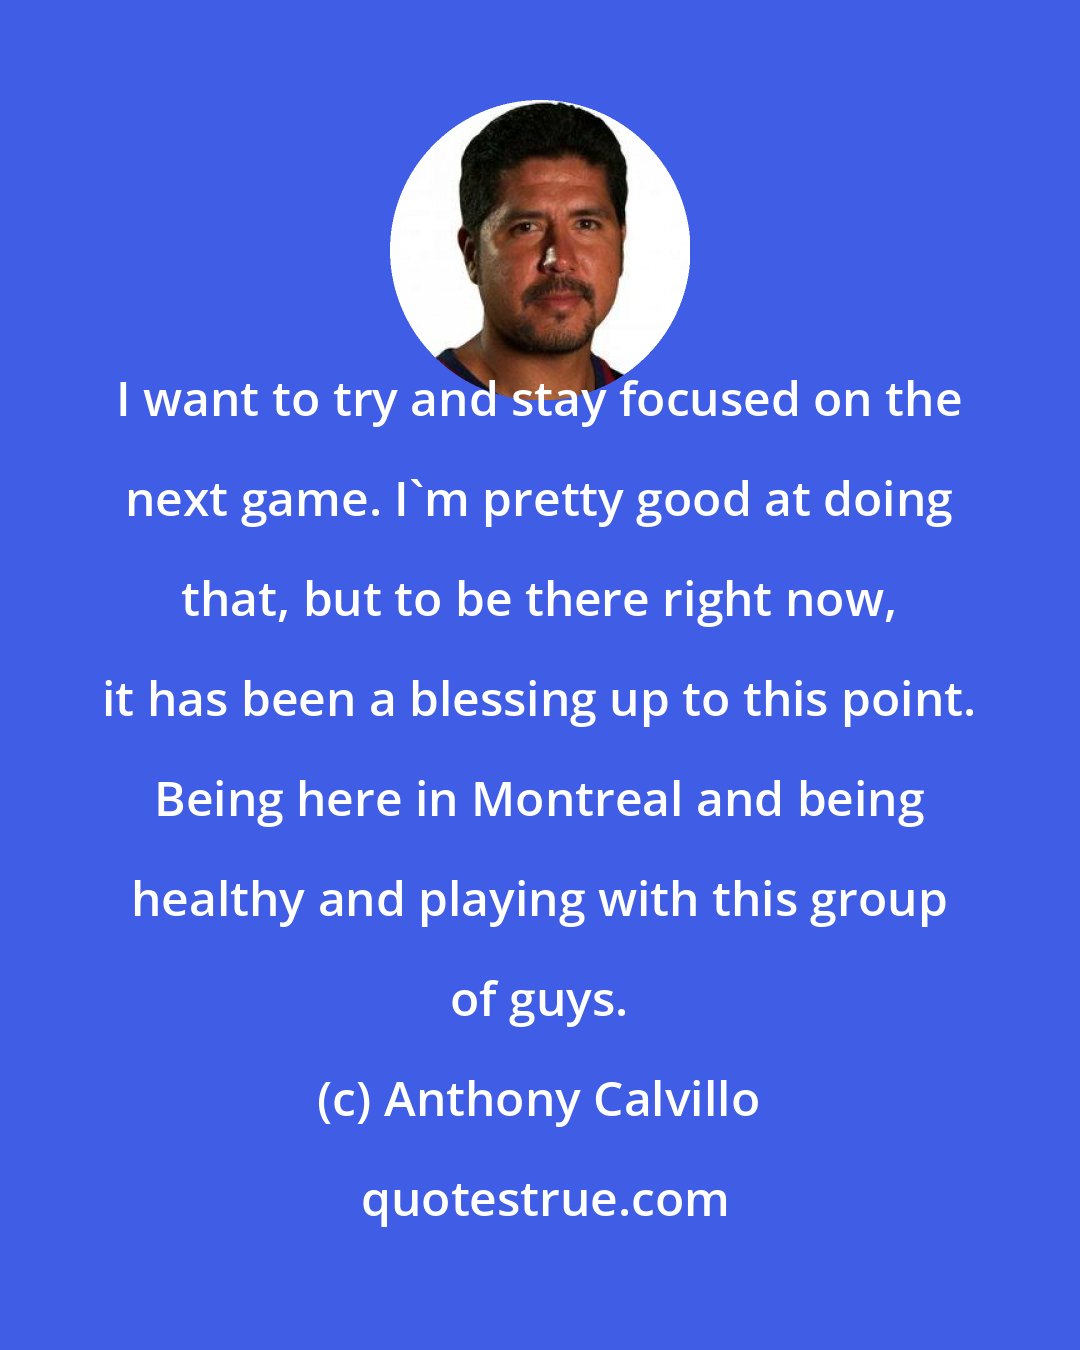 Anthony Calvillo: I want to try and stay focused on the next game. I'm pretty good at doing that, but to be there right now, it has been a blessing up to this point. Being here in Montreal and being healthy and playing with this group of guys.